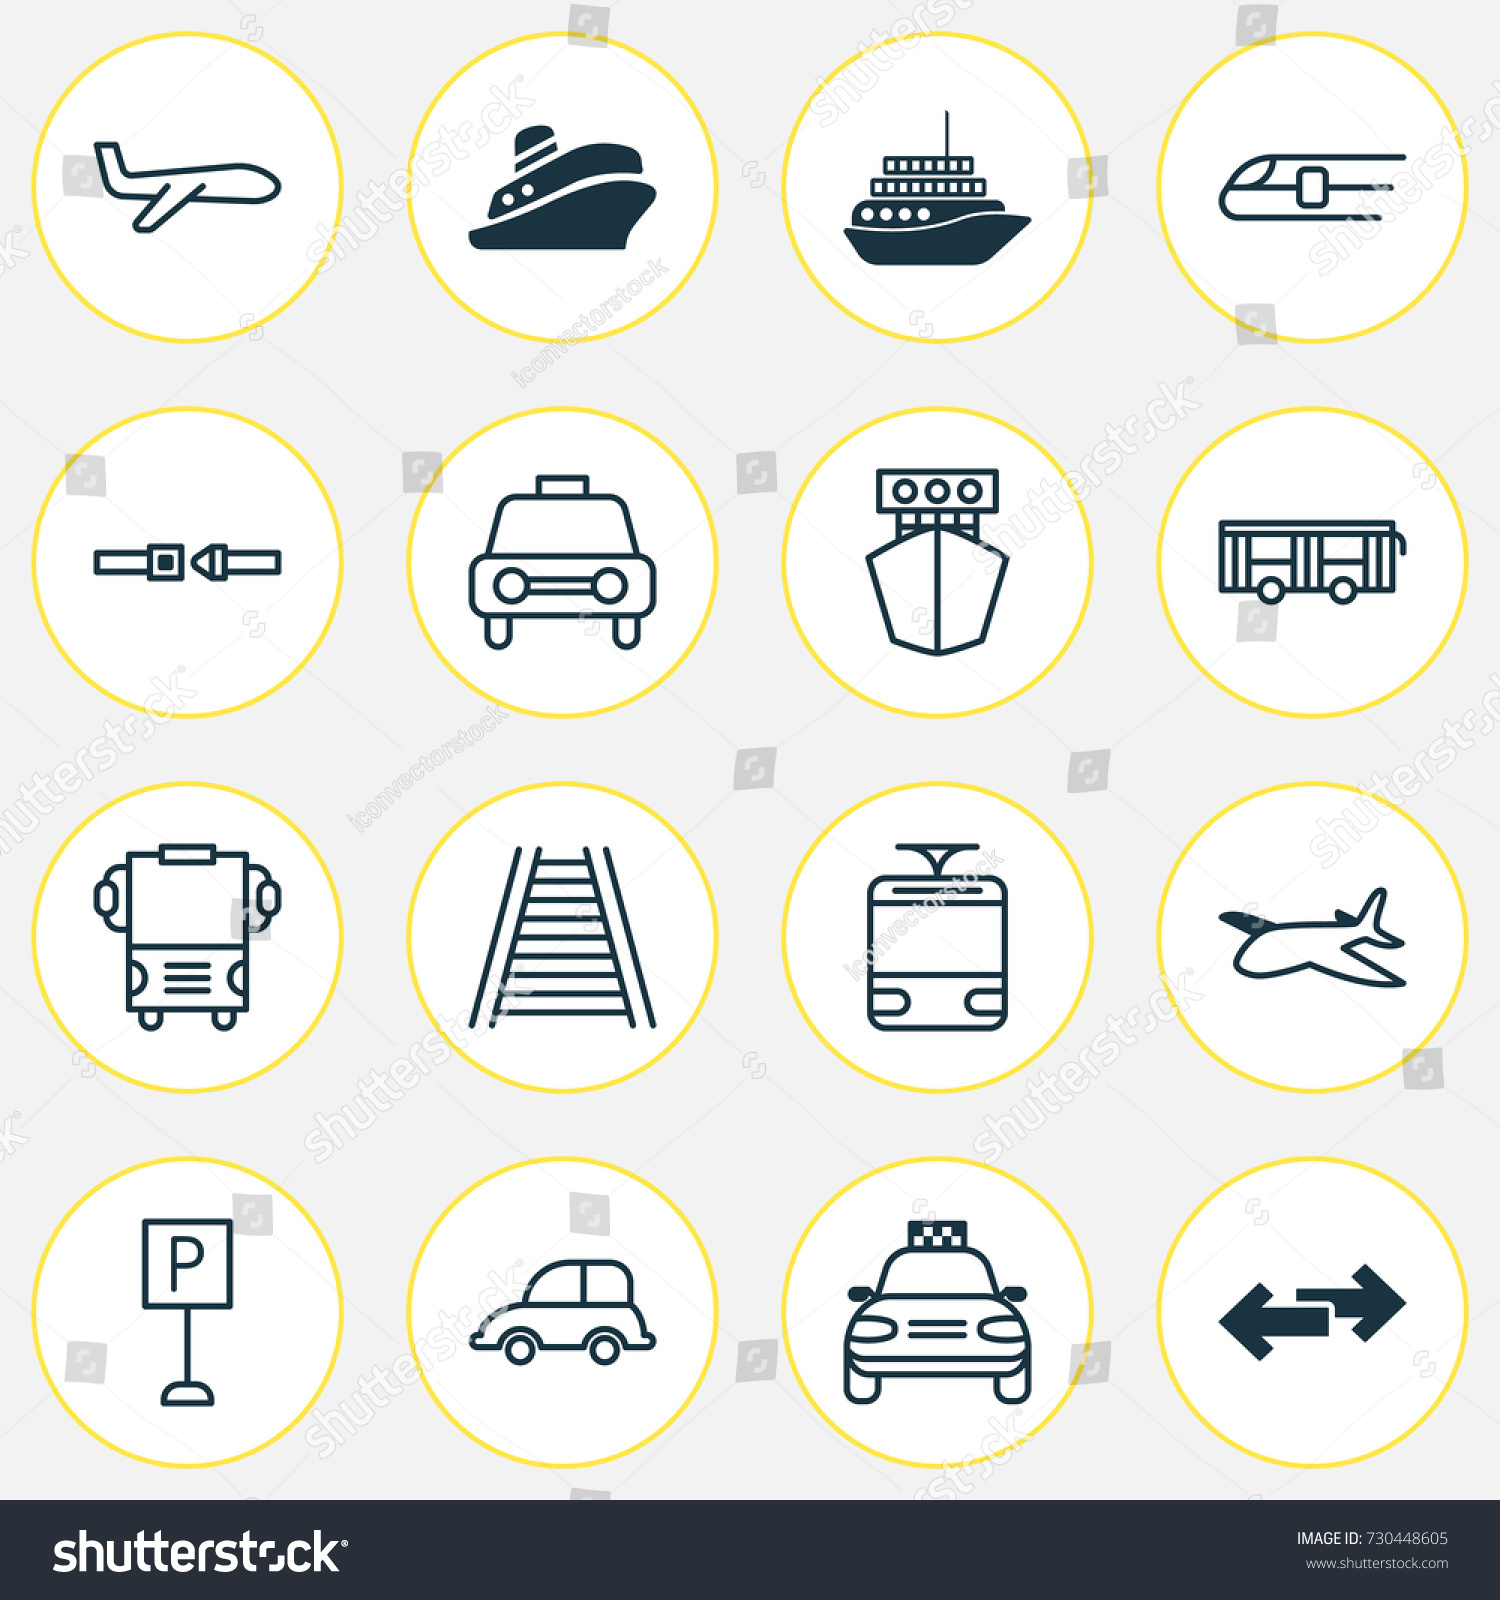 Shipping Icons Set. Collection Of Transport, Air Transport, Auto Car And Other Elements. Also Includes Symbols Such As Railroad, Shipping, Roadsign. #730448605